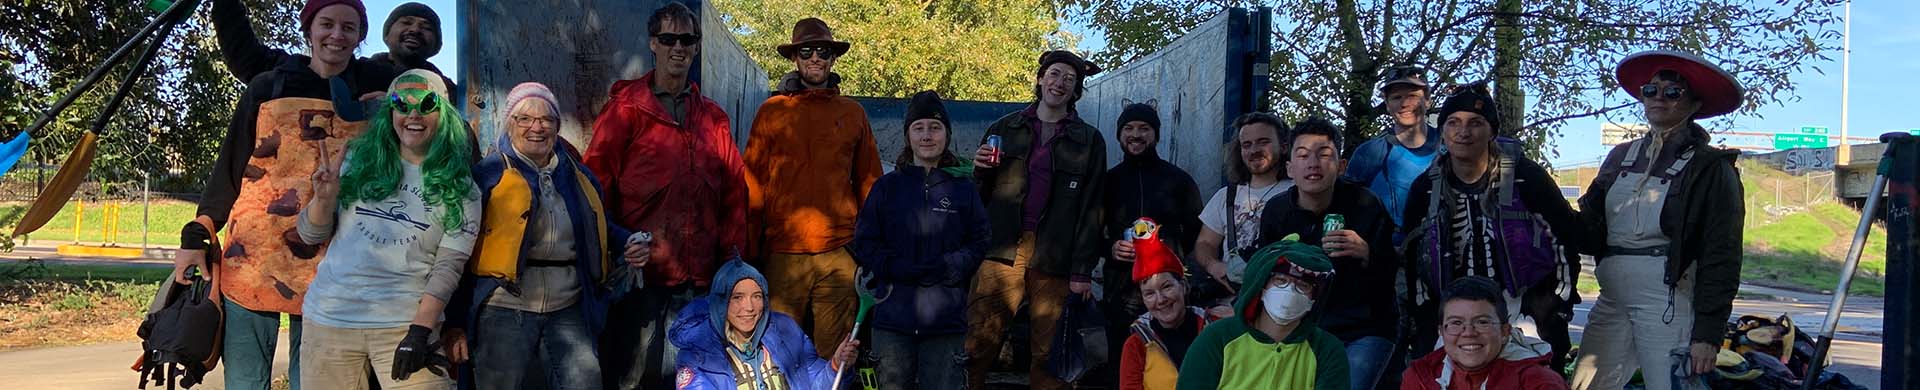 Columbia Slough Volunteers in Costume With Dumpster